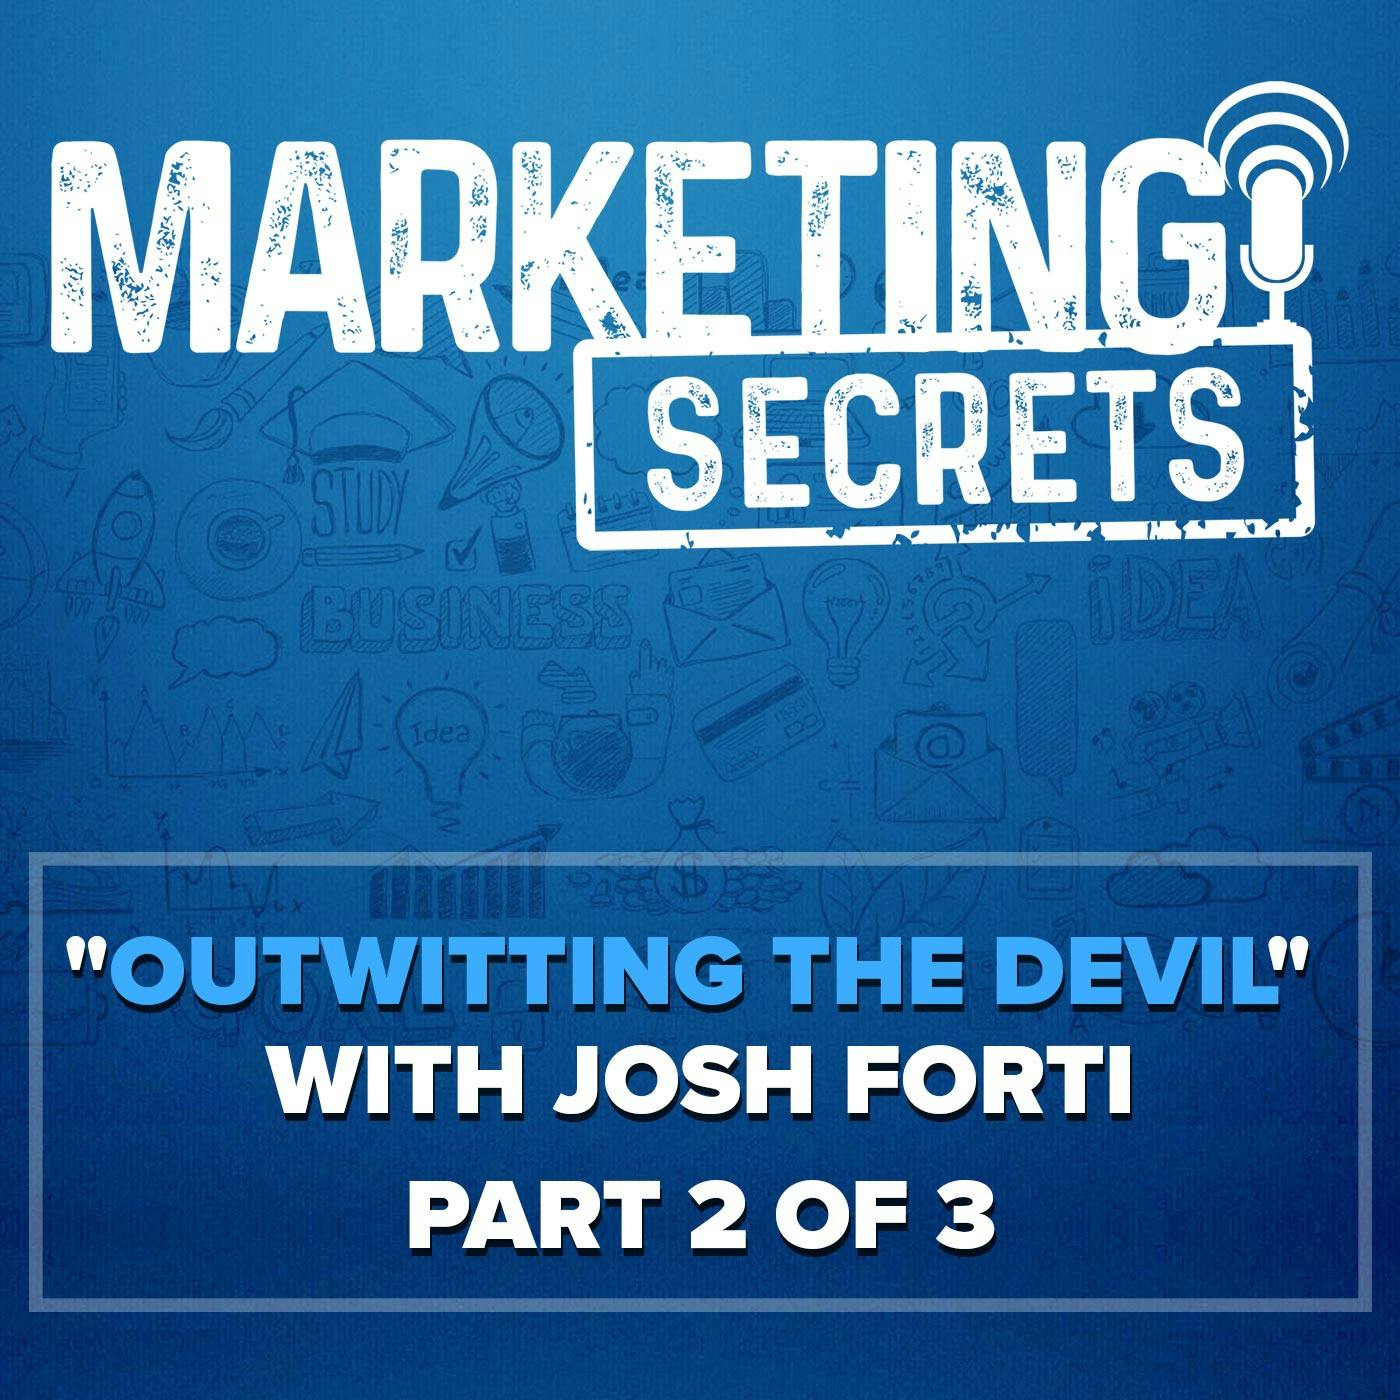 "Outwitting The Devil" with Josh Forti - Part 2 of 3